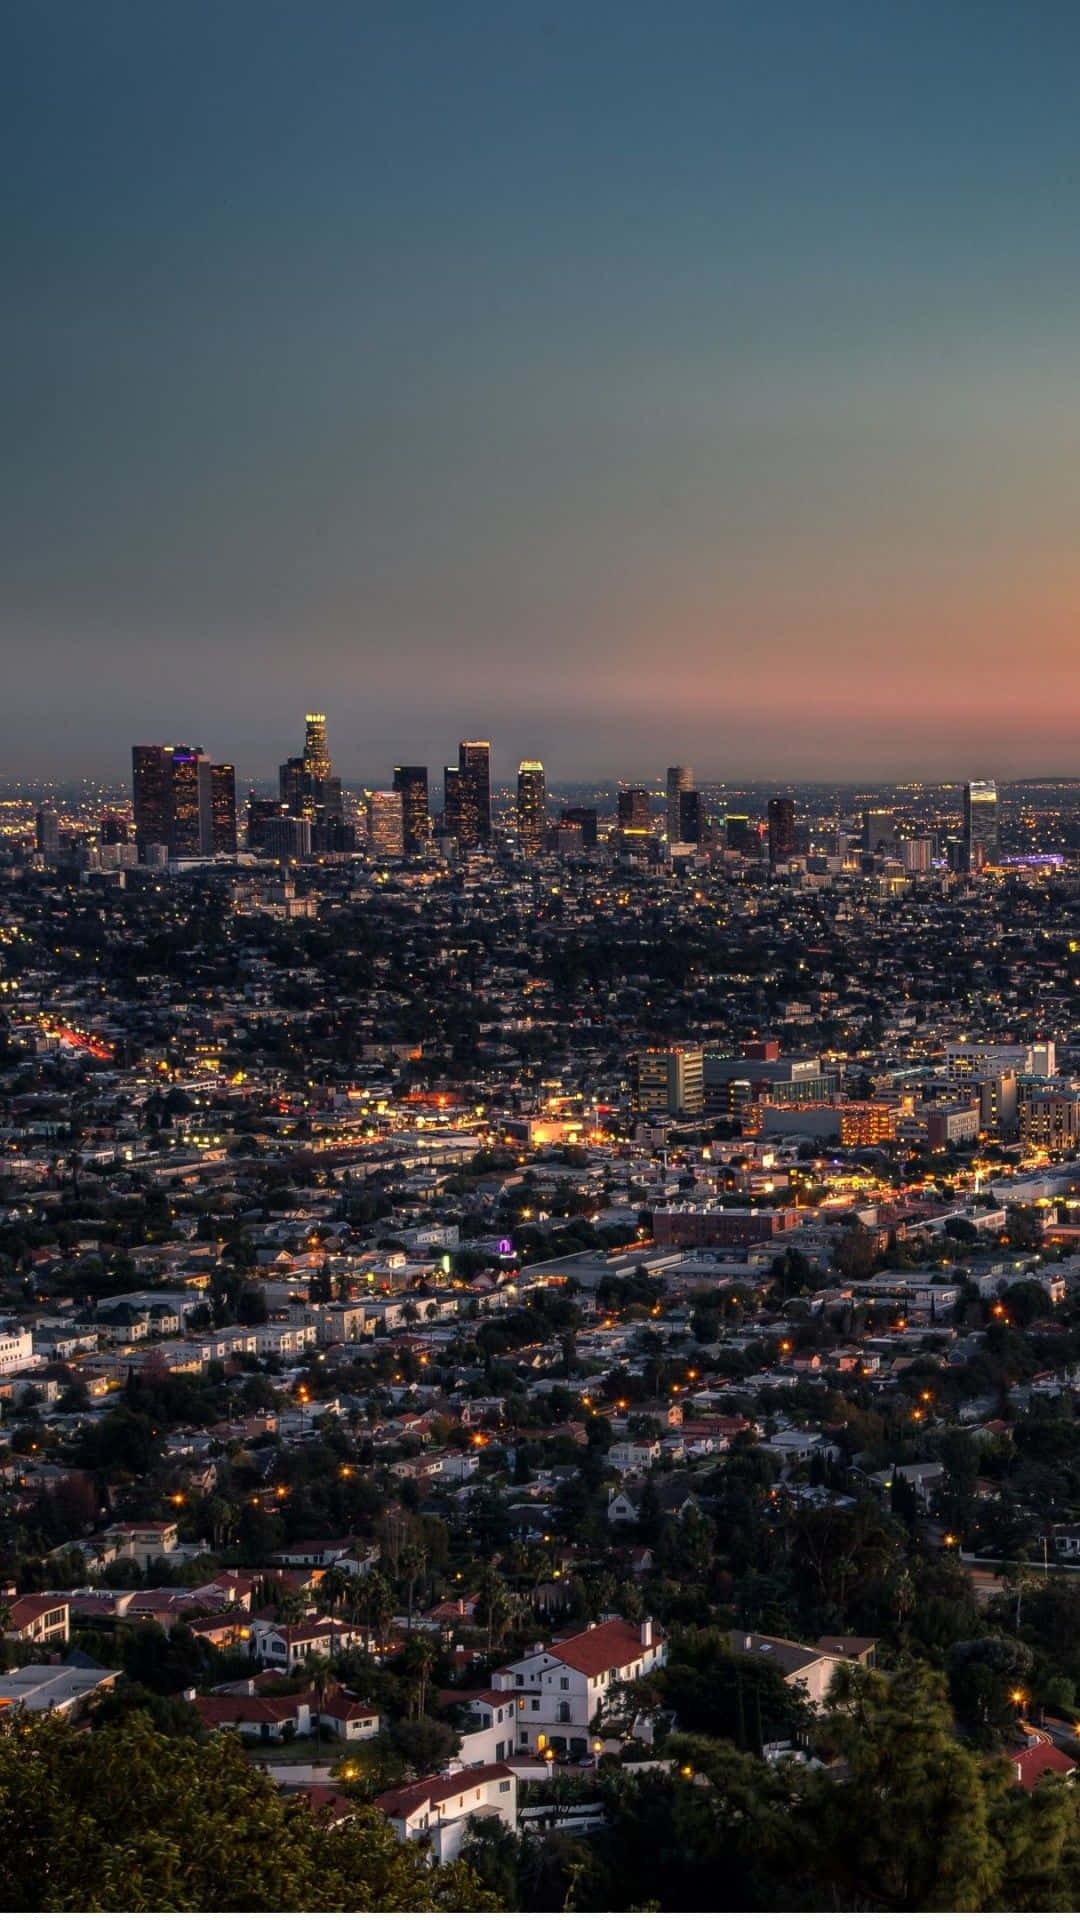 Enjoy the beauty of Los Angeles with your iPhone Wallpaper